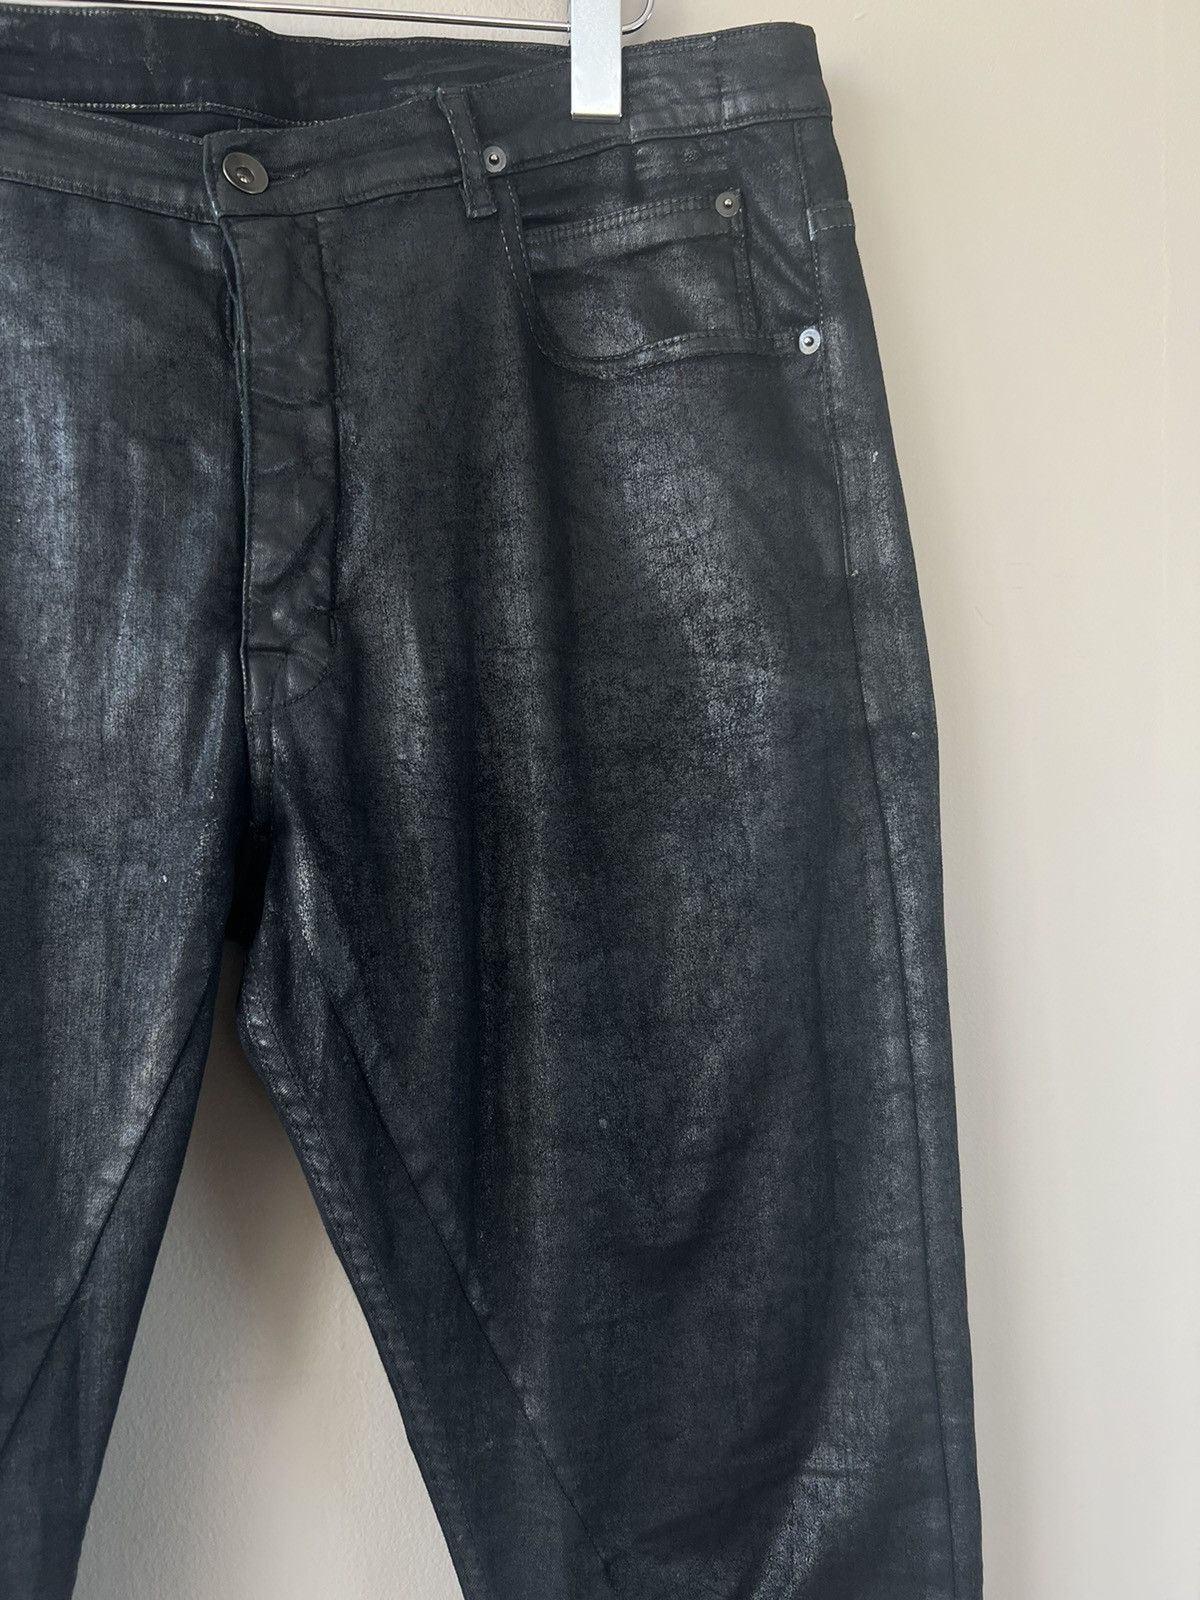 Black Waxed Torrence Cut Jeans - 4